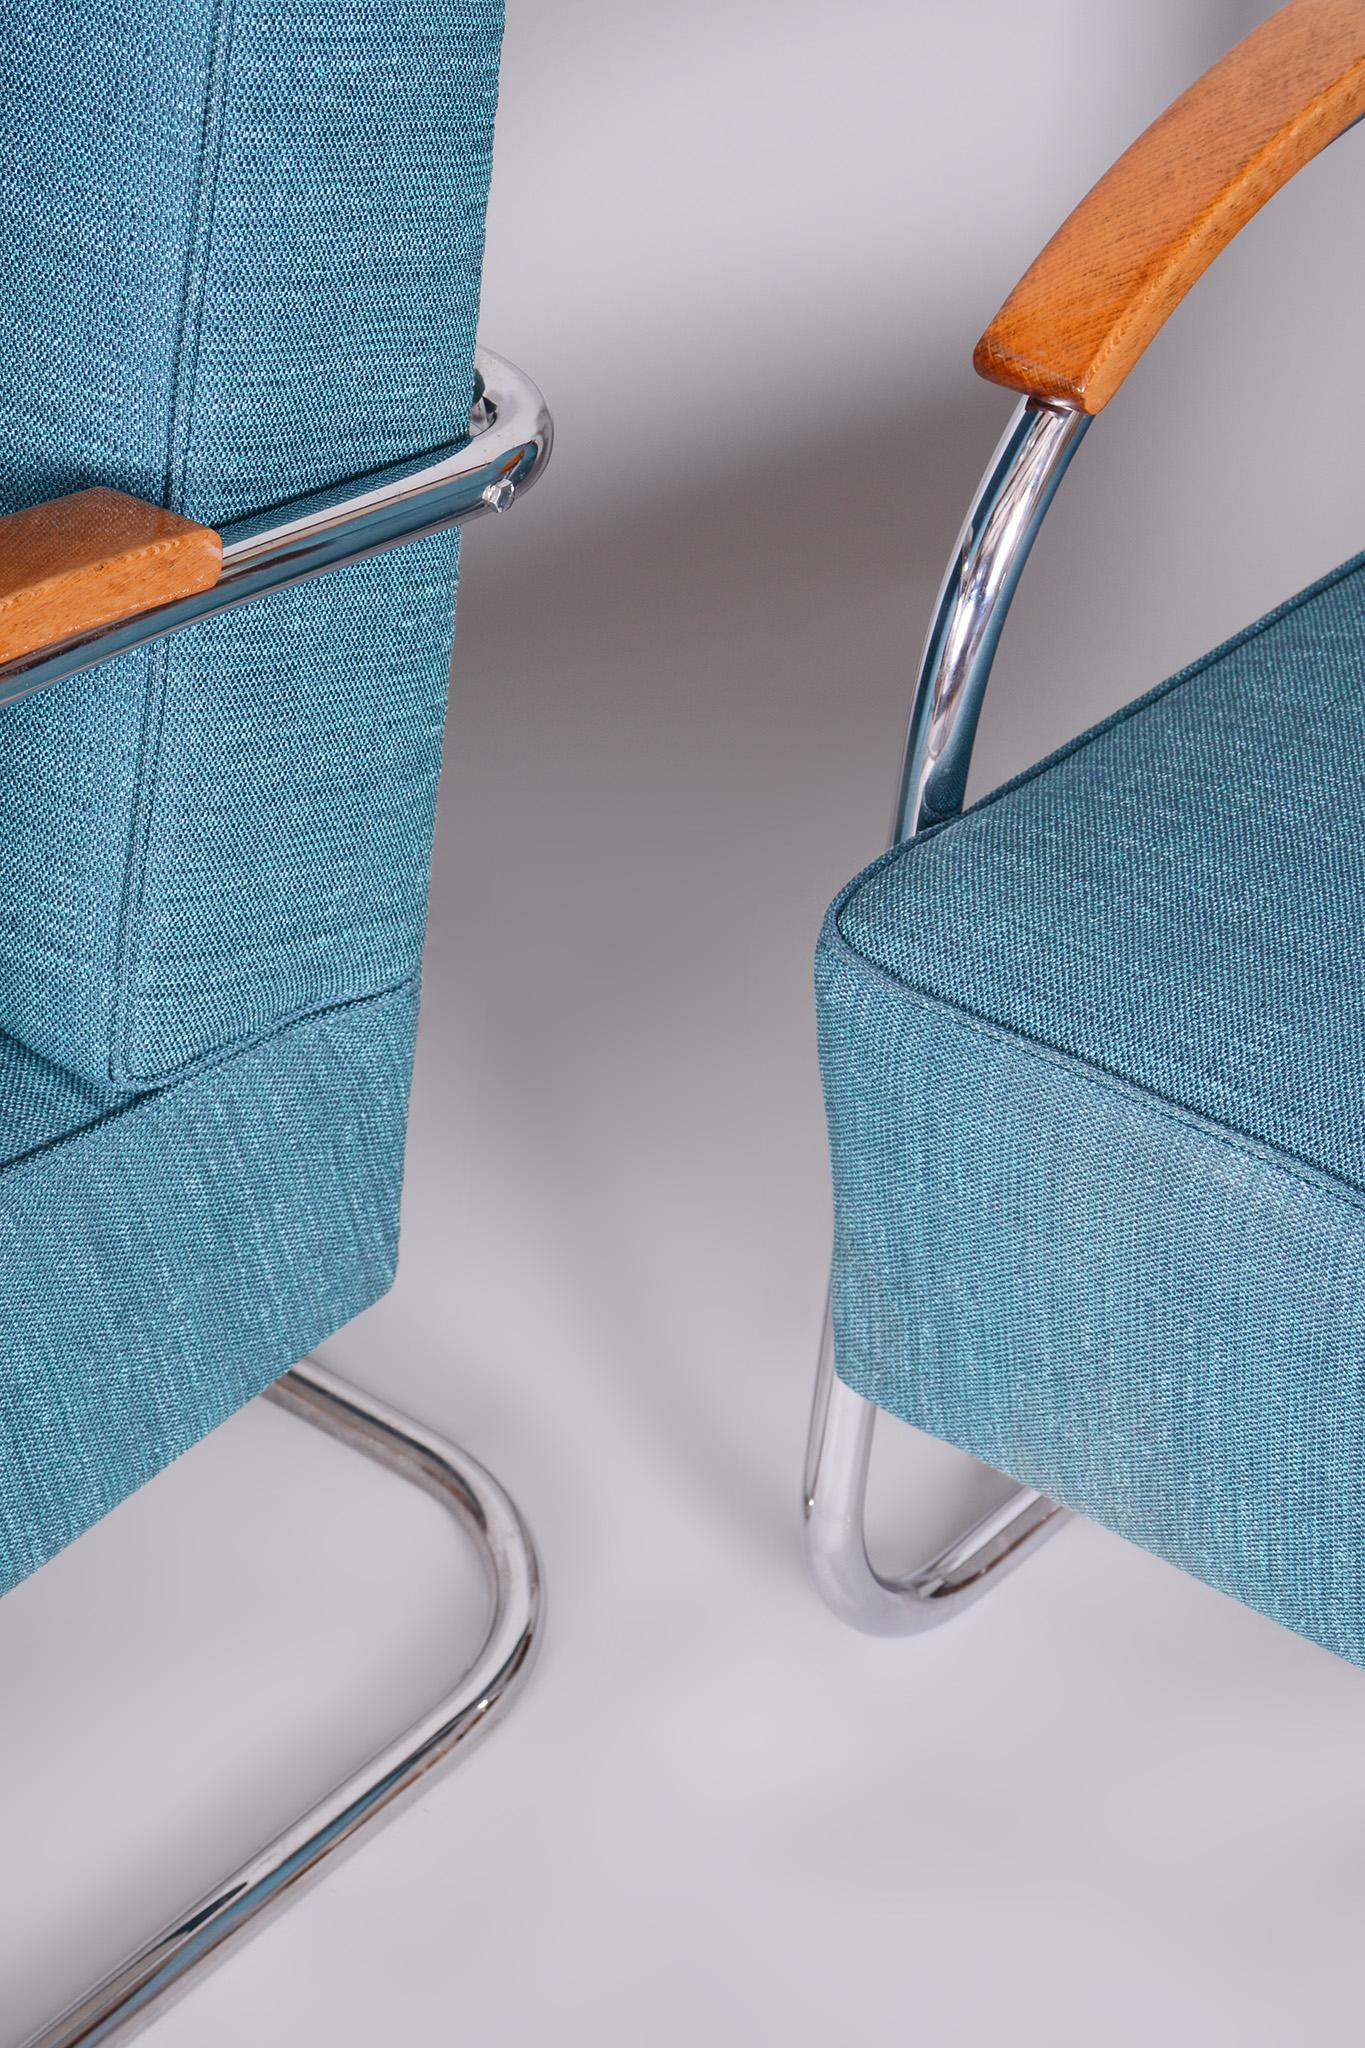 20th Century Set of Two Restored Blue Armchairs by Mucke-Melder, Czechia, 1930s For Sale